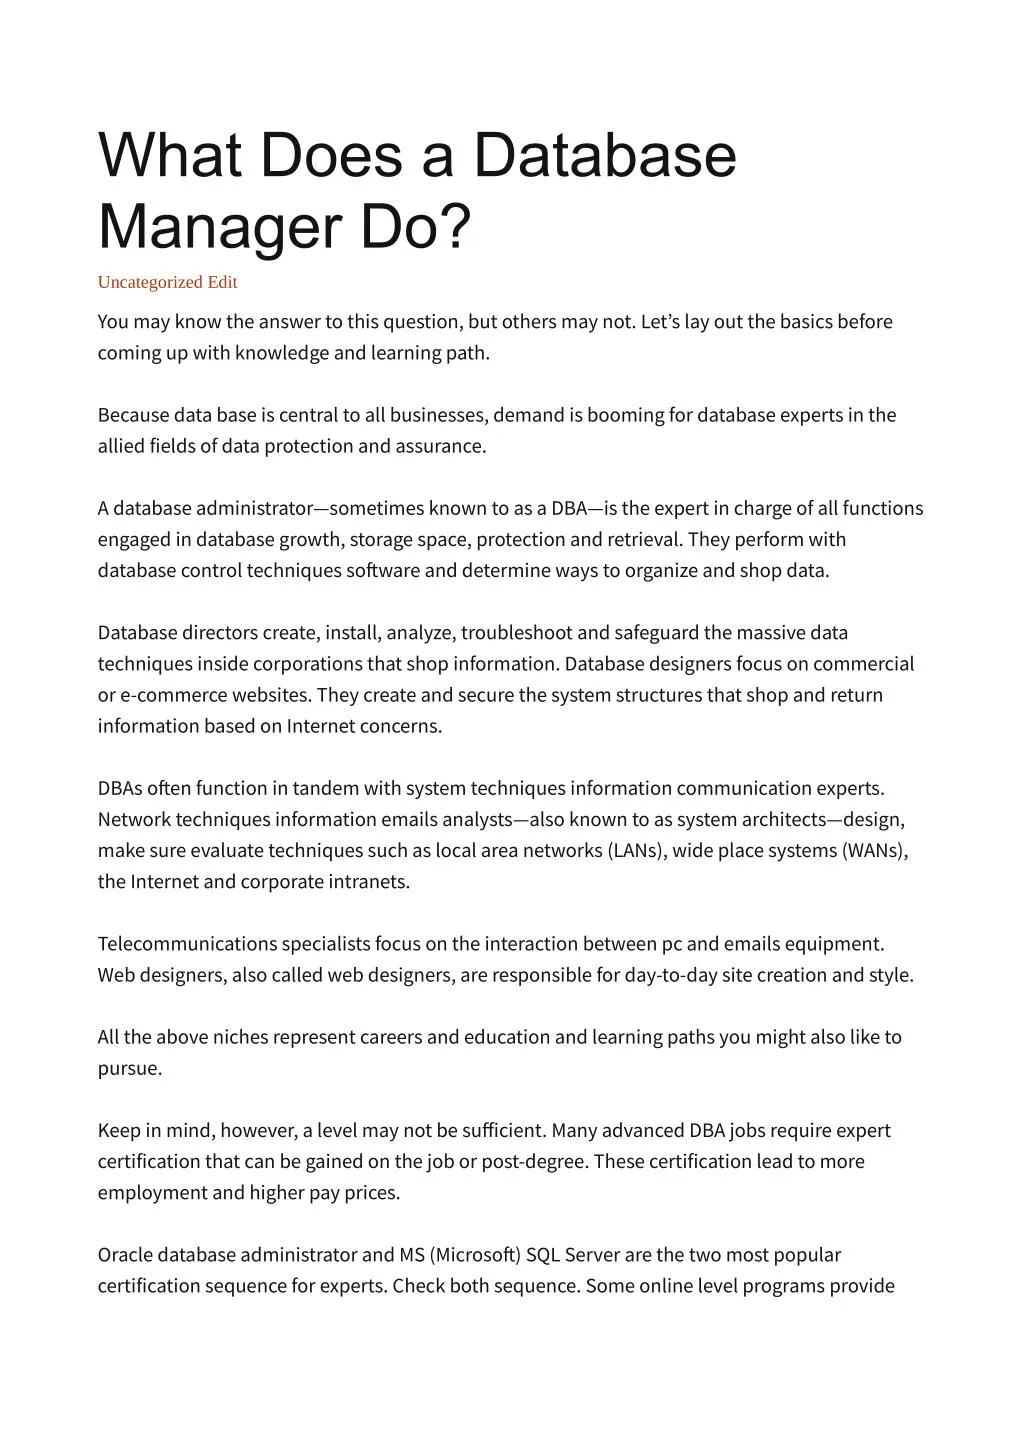 what does a database manager do